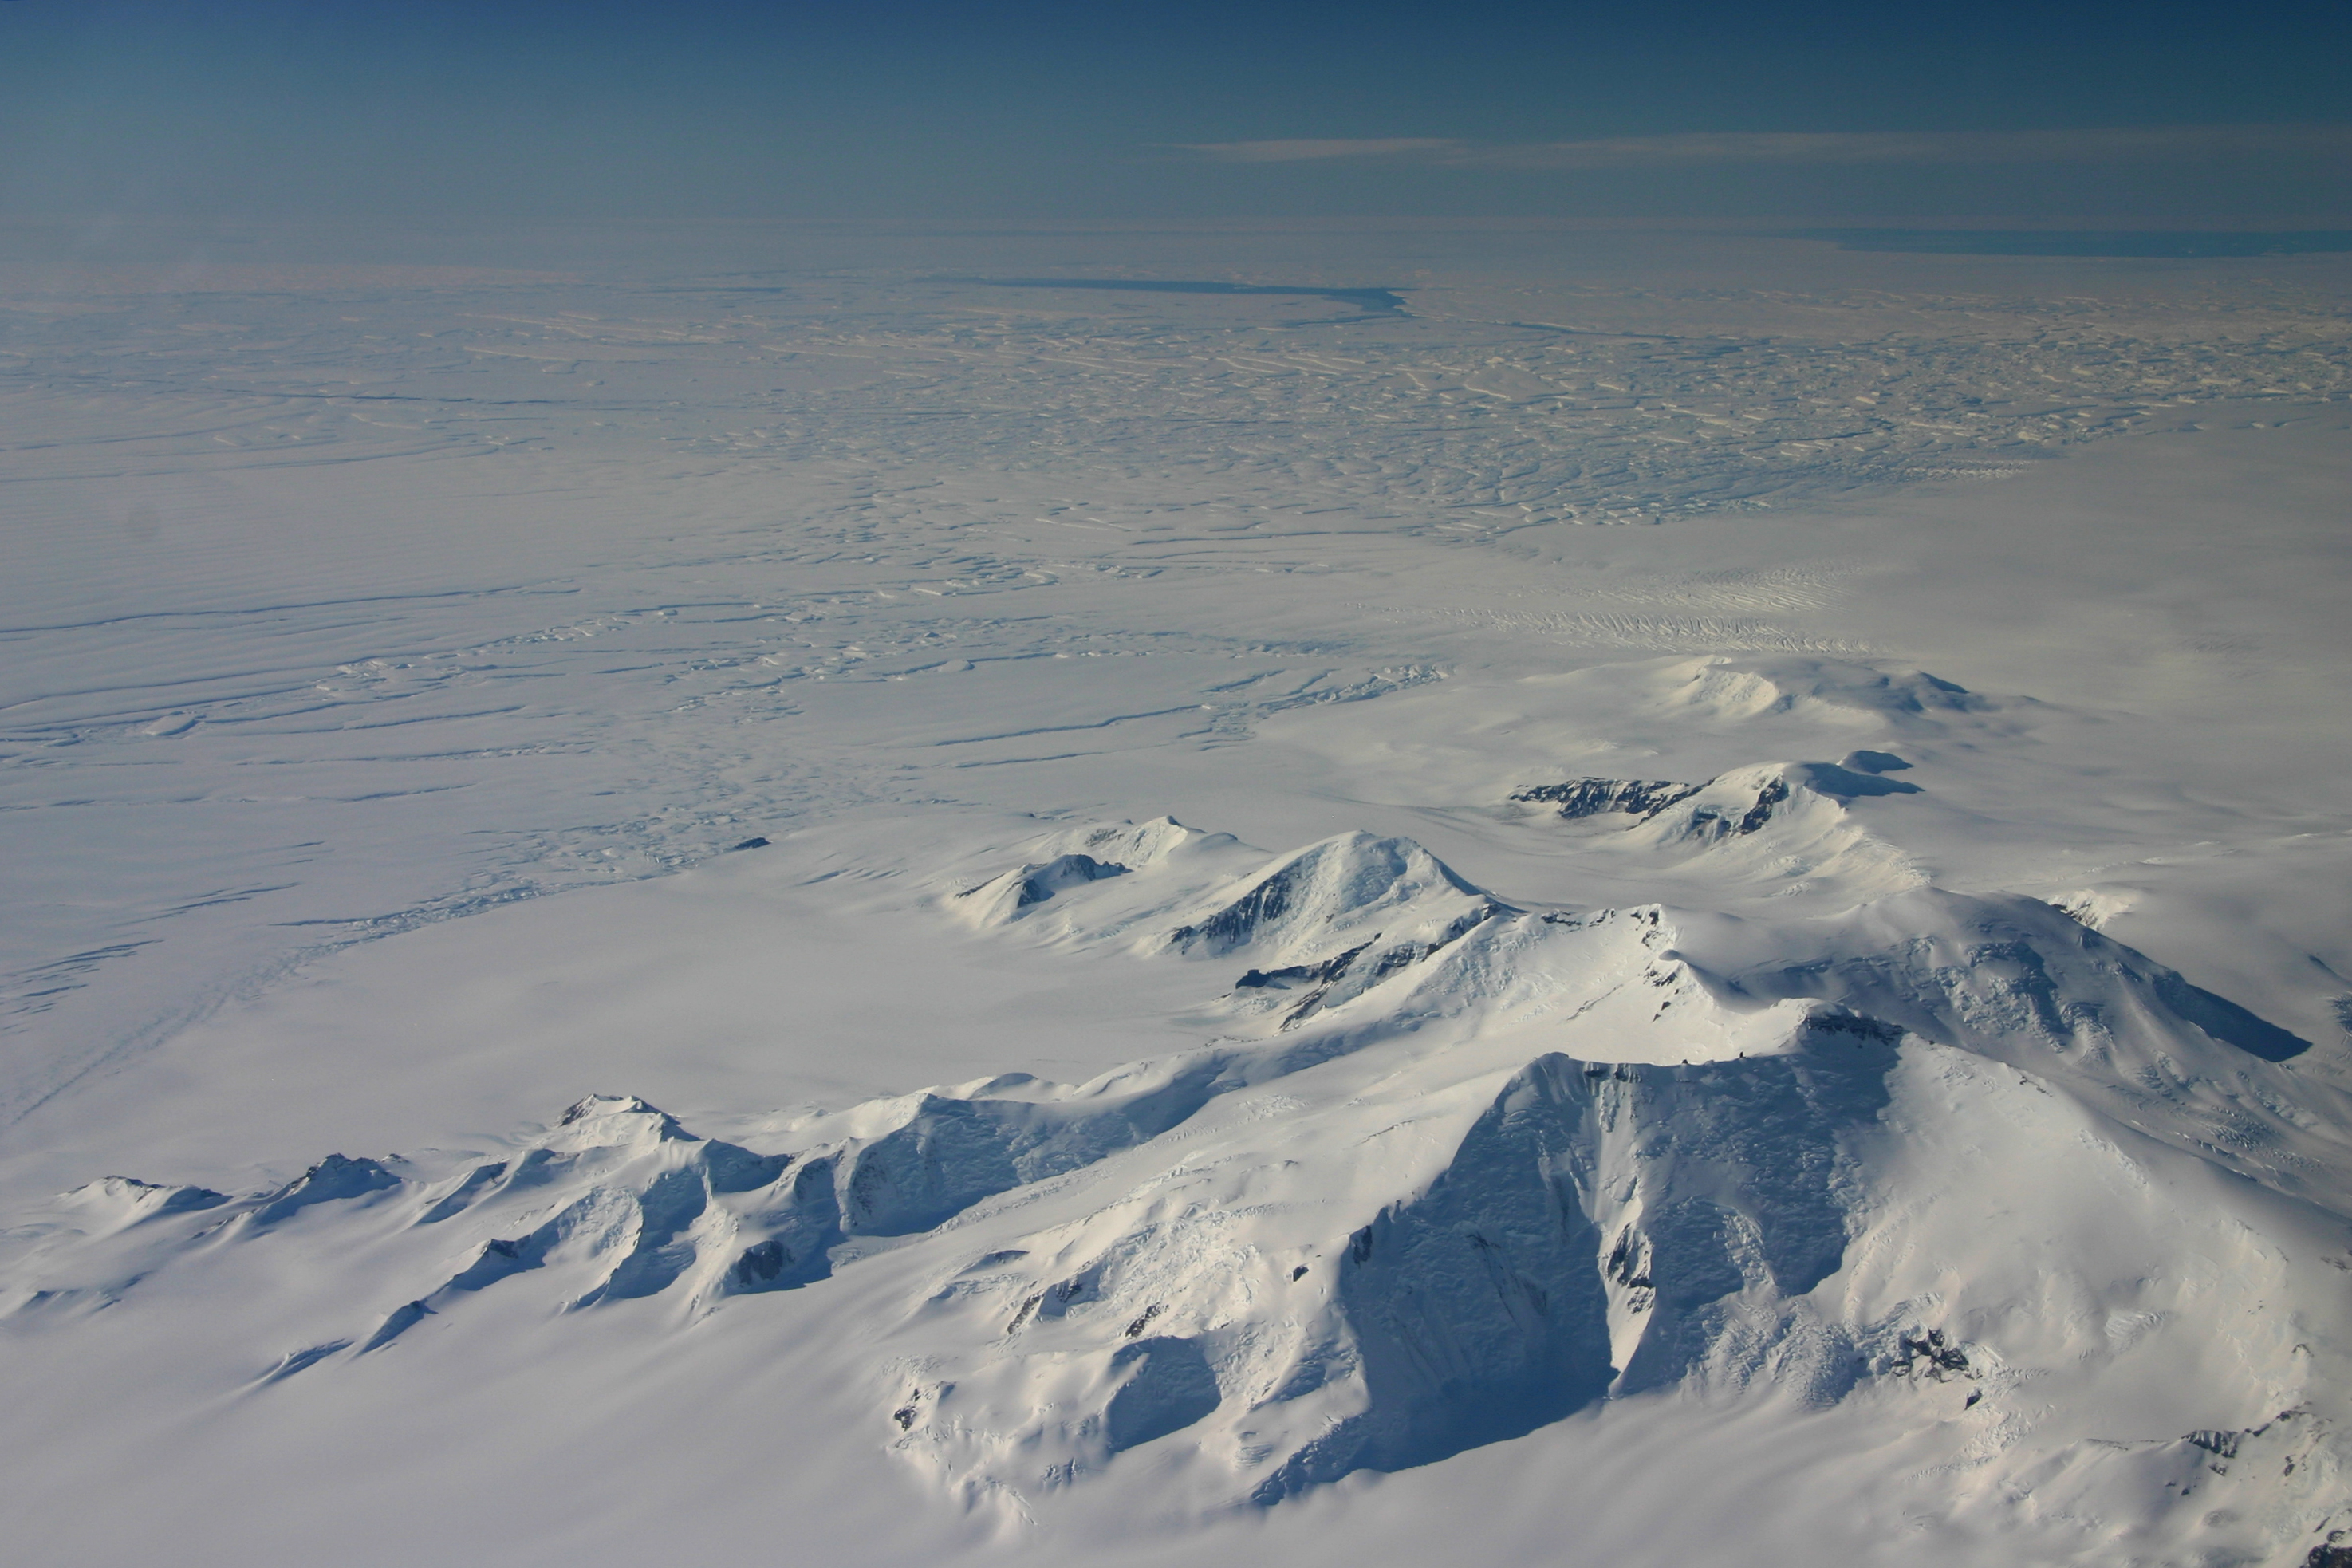 A handout photo released by Nature shows part of the eastern flank of Crosson Ice Shelf (C-L) and Mount Murphy (foreground) as viewed during a NASA IceBridge flight on October 23, 2012, with Thwaites Ice Shelf beyond the highly fractured expanse of ice (C). A large glacier in West Antarctica lost up to half a kilometre in thickness in seven years, thinning more quickly than scientists thought possible, according to a study released on October 25, 2016. The Smith Glacier, spilling into the Amundsen Sea, shed up to 70 metres (230 feet) per year between 2002 and 2009, according to the study, based on NASA data collected during aerial flyovers.  / AFP PHOTO / NATURE PUBLISHING GROUP / John SONNTAG / RESTRICTED TO EDITORIAL USE - MANDATORY CREDIT "AFP PHOTO / NATURE / JOHN SONNTAG" - NO MARKETING NO ADVERTISING CAMPAIGNS - DISTRIBUTED AS A SERVICE TO CLIENTS